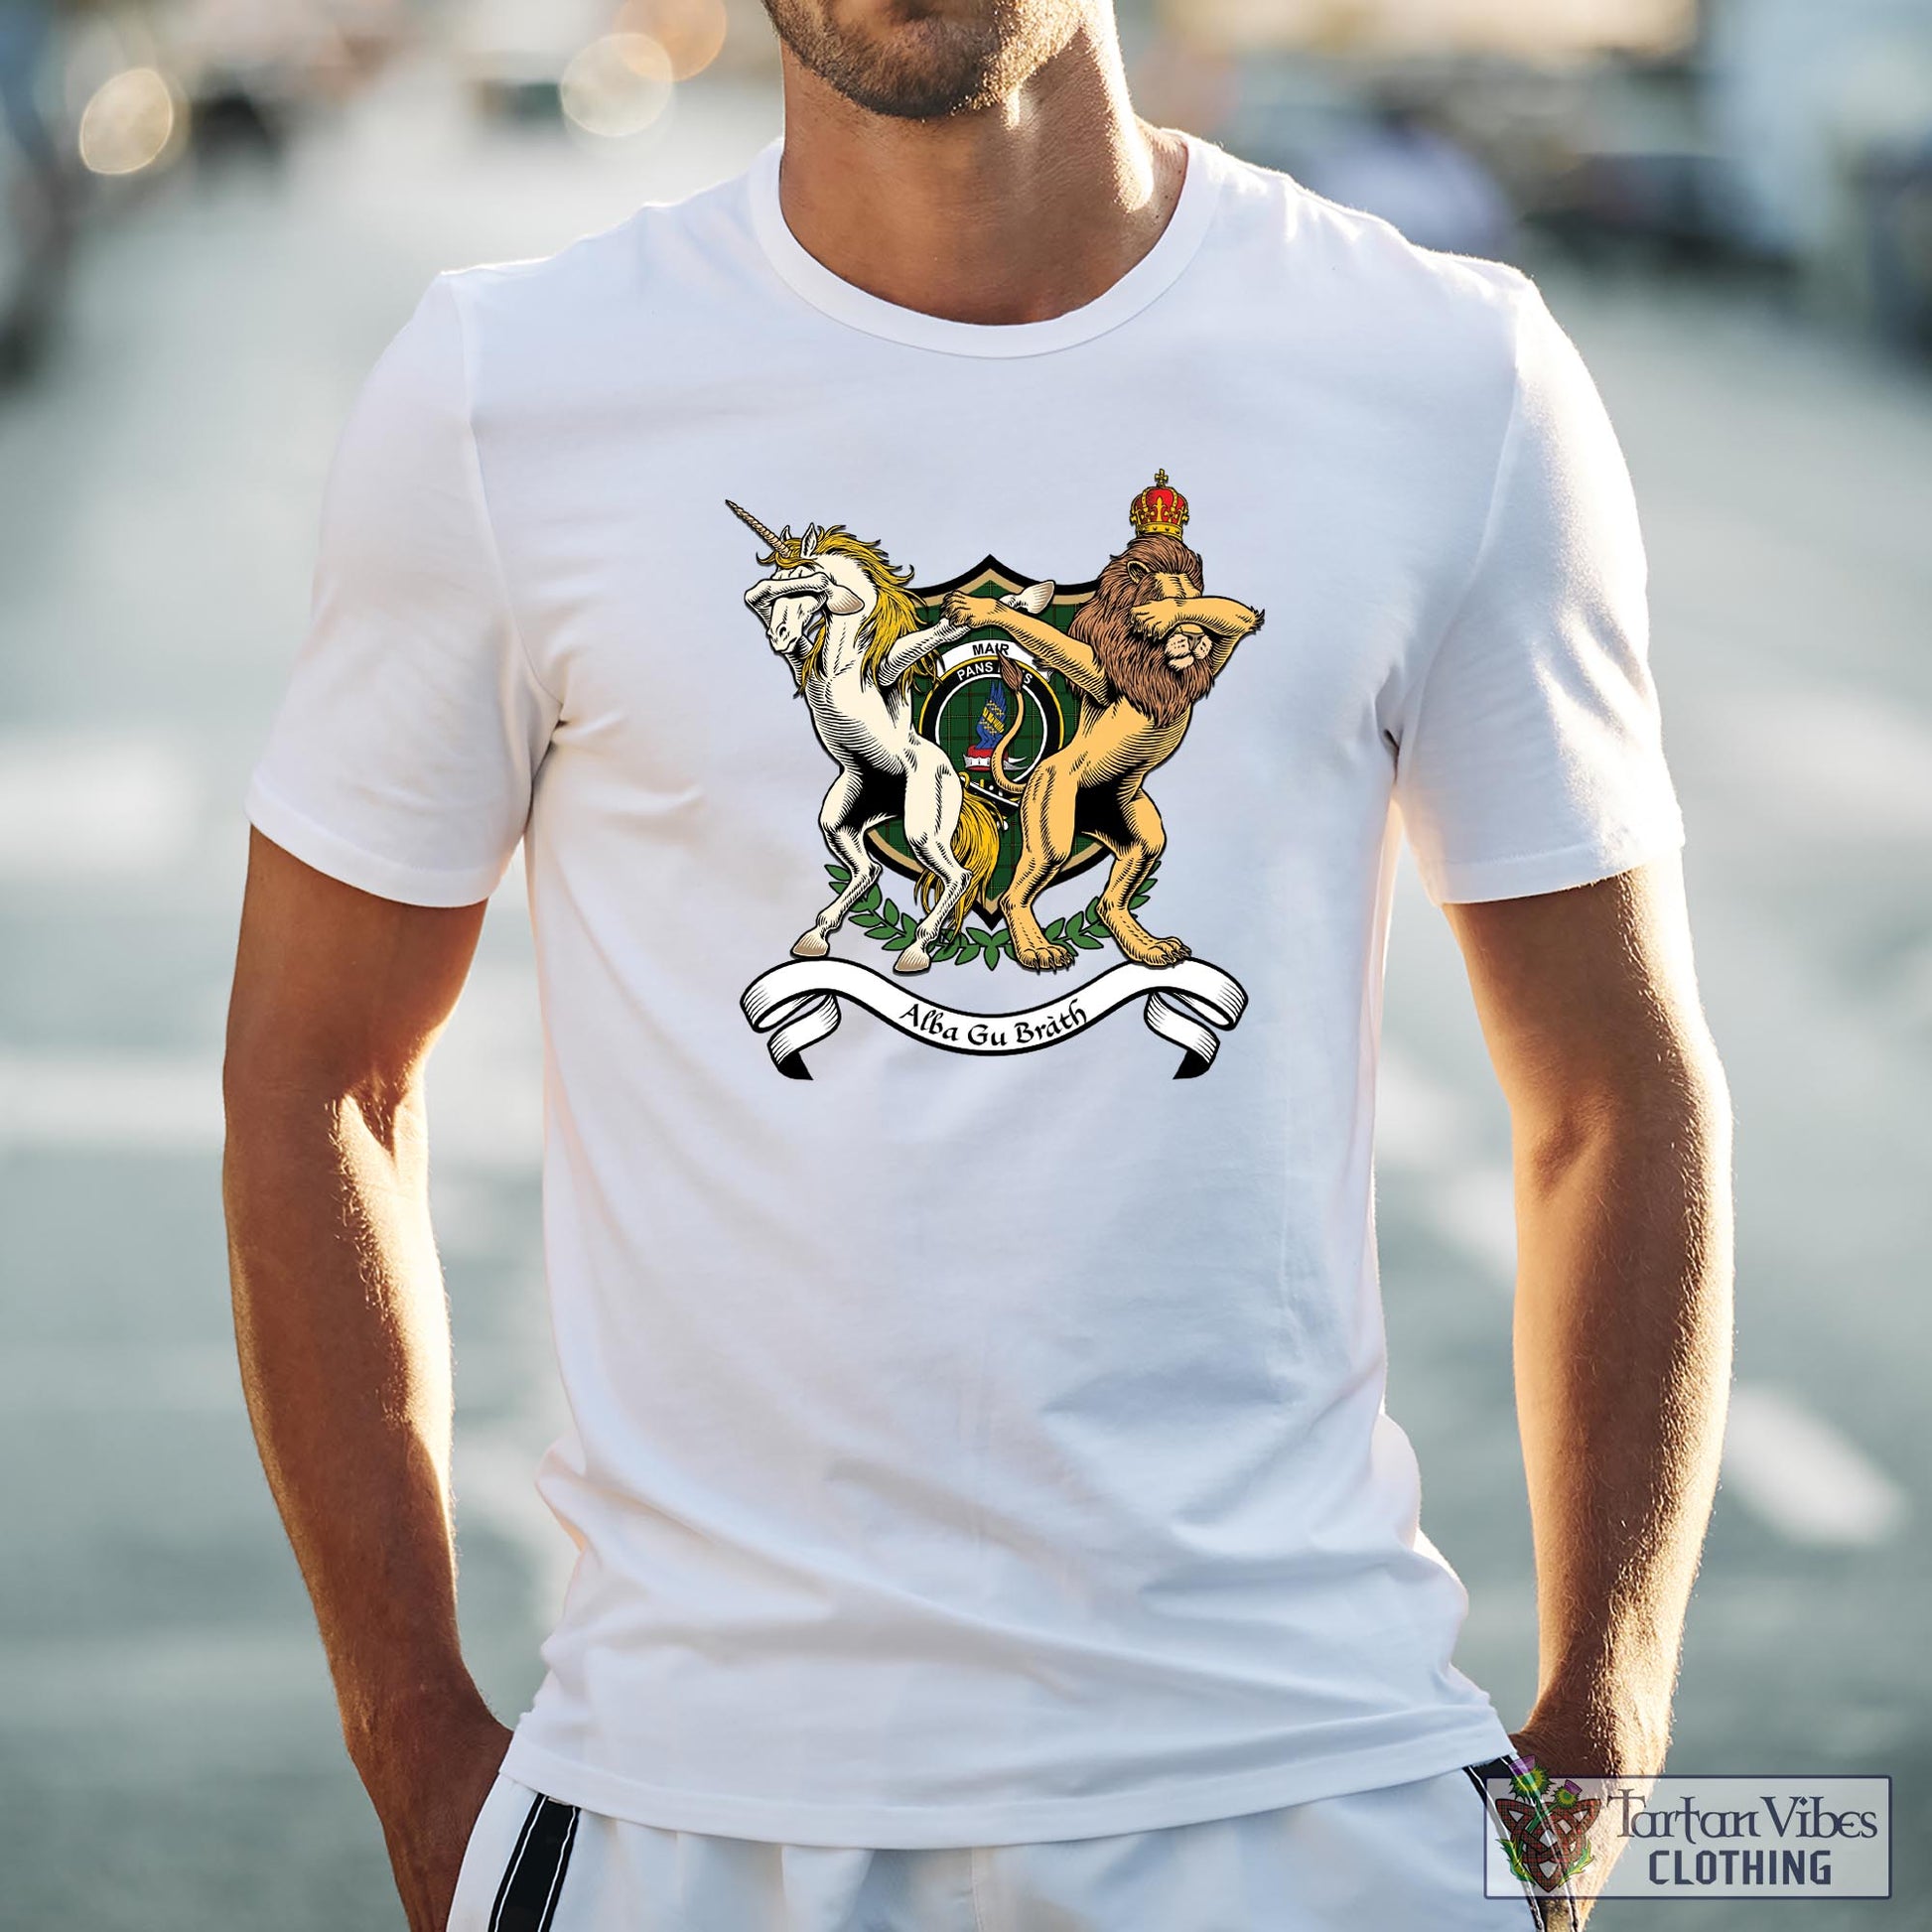 Tartan Vibes Clothing Mar Tribe Family Crest Cotton Men's T-Shirt with Scotland Royal Coat Of Arm Funny Style